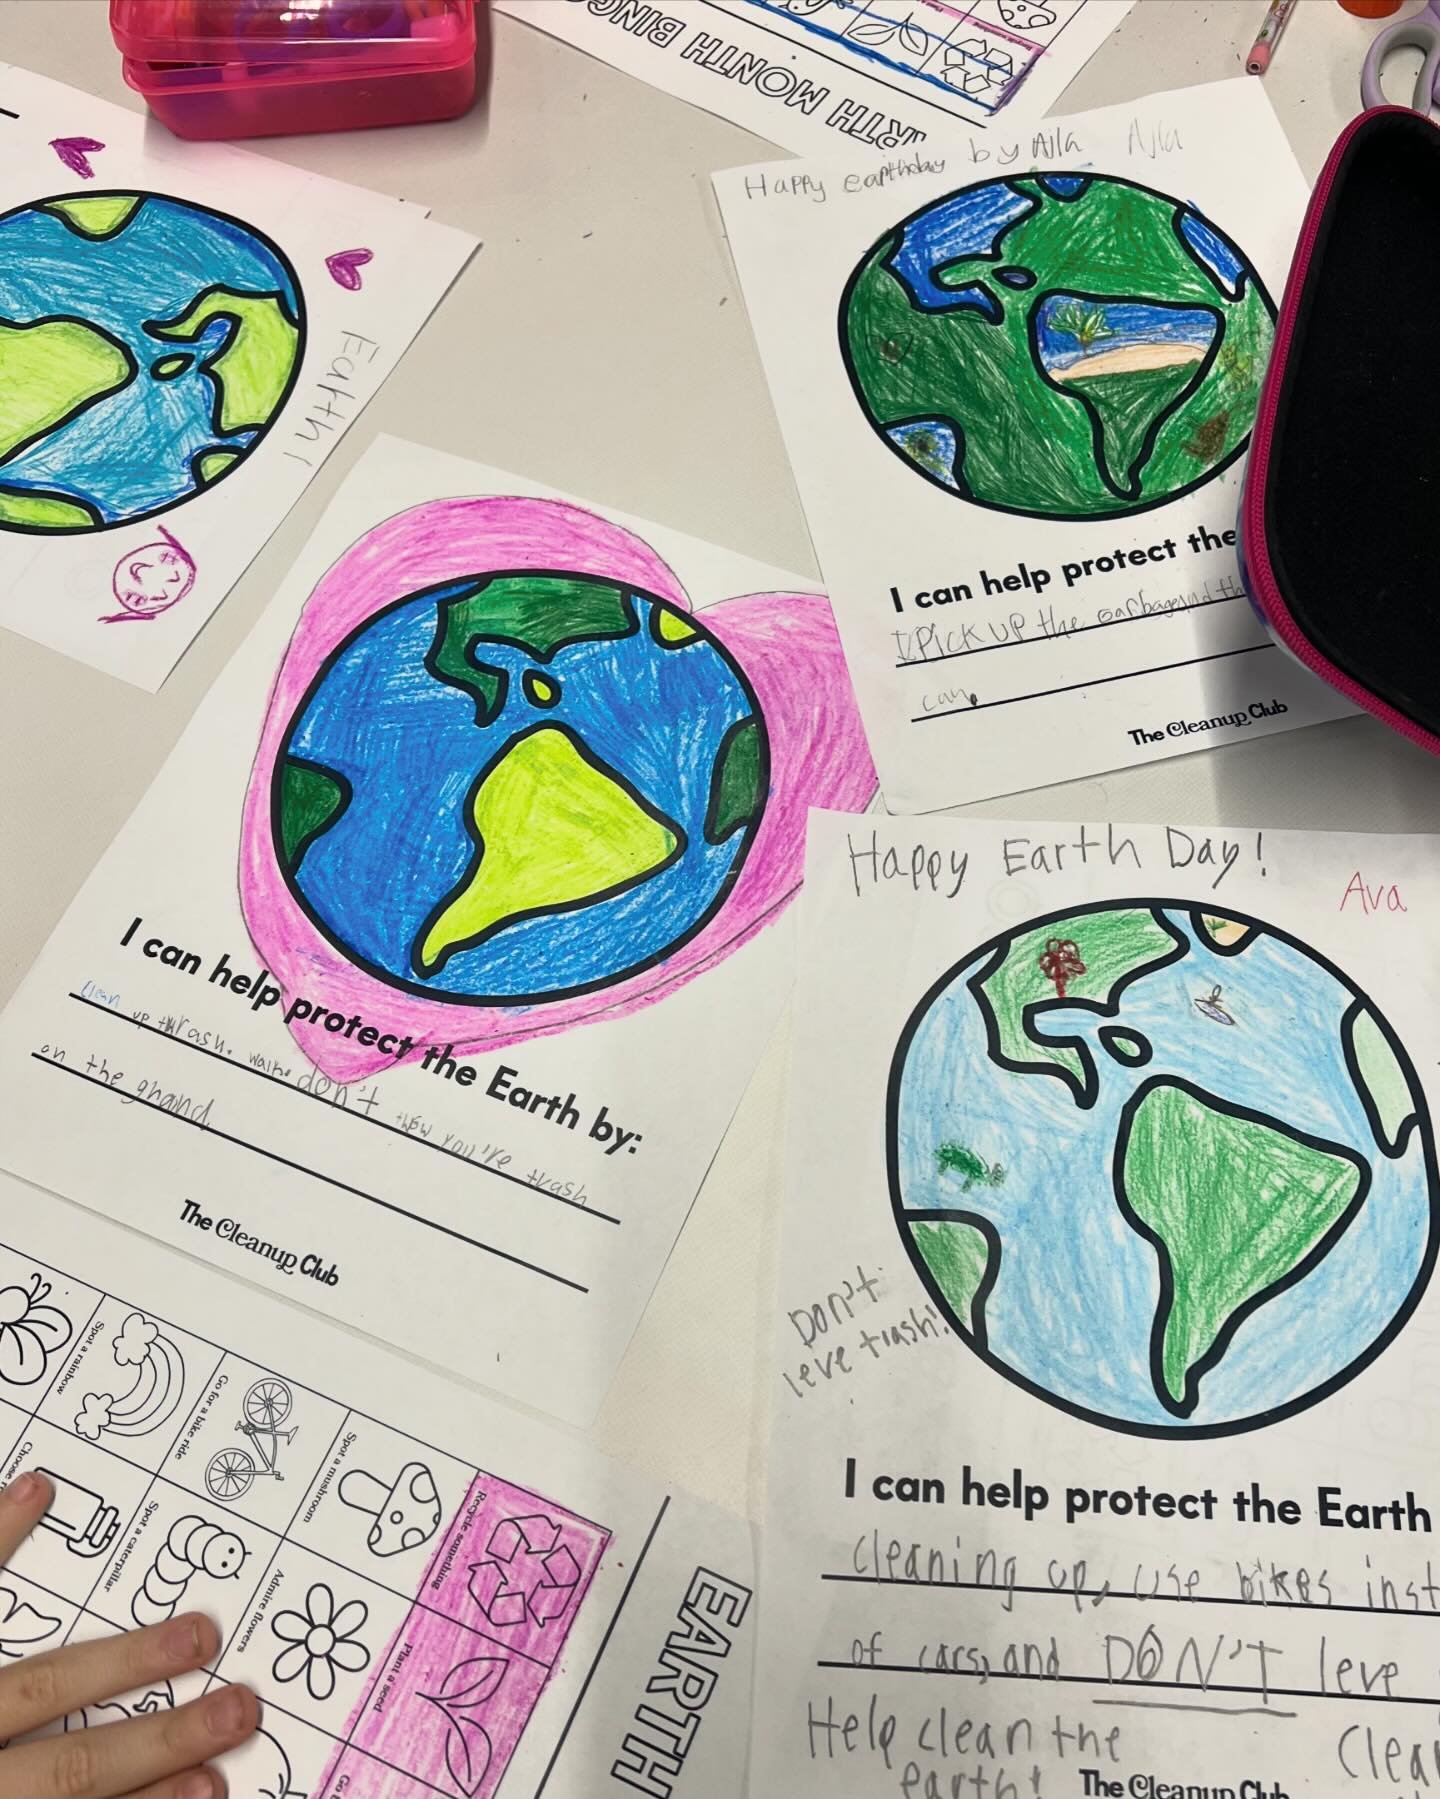 We&rsquo;re always inspired by the creativity and fun ideas kids have when it comes to taking care of the planet! 🌎🎨

#TheCleanupClub #EnvironmentalEducation #EarthMonth